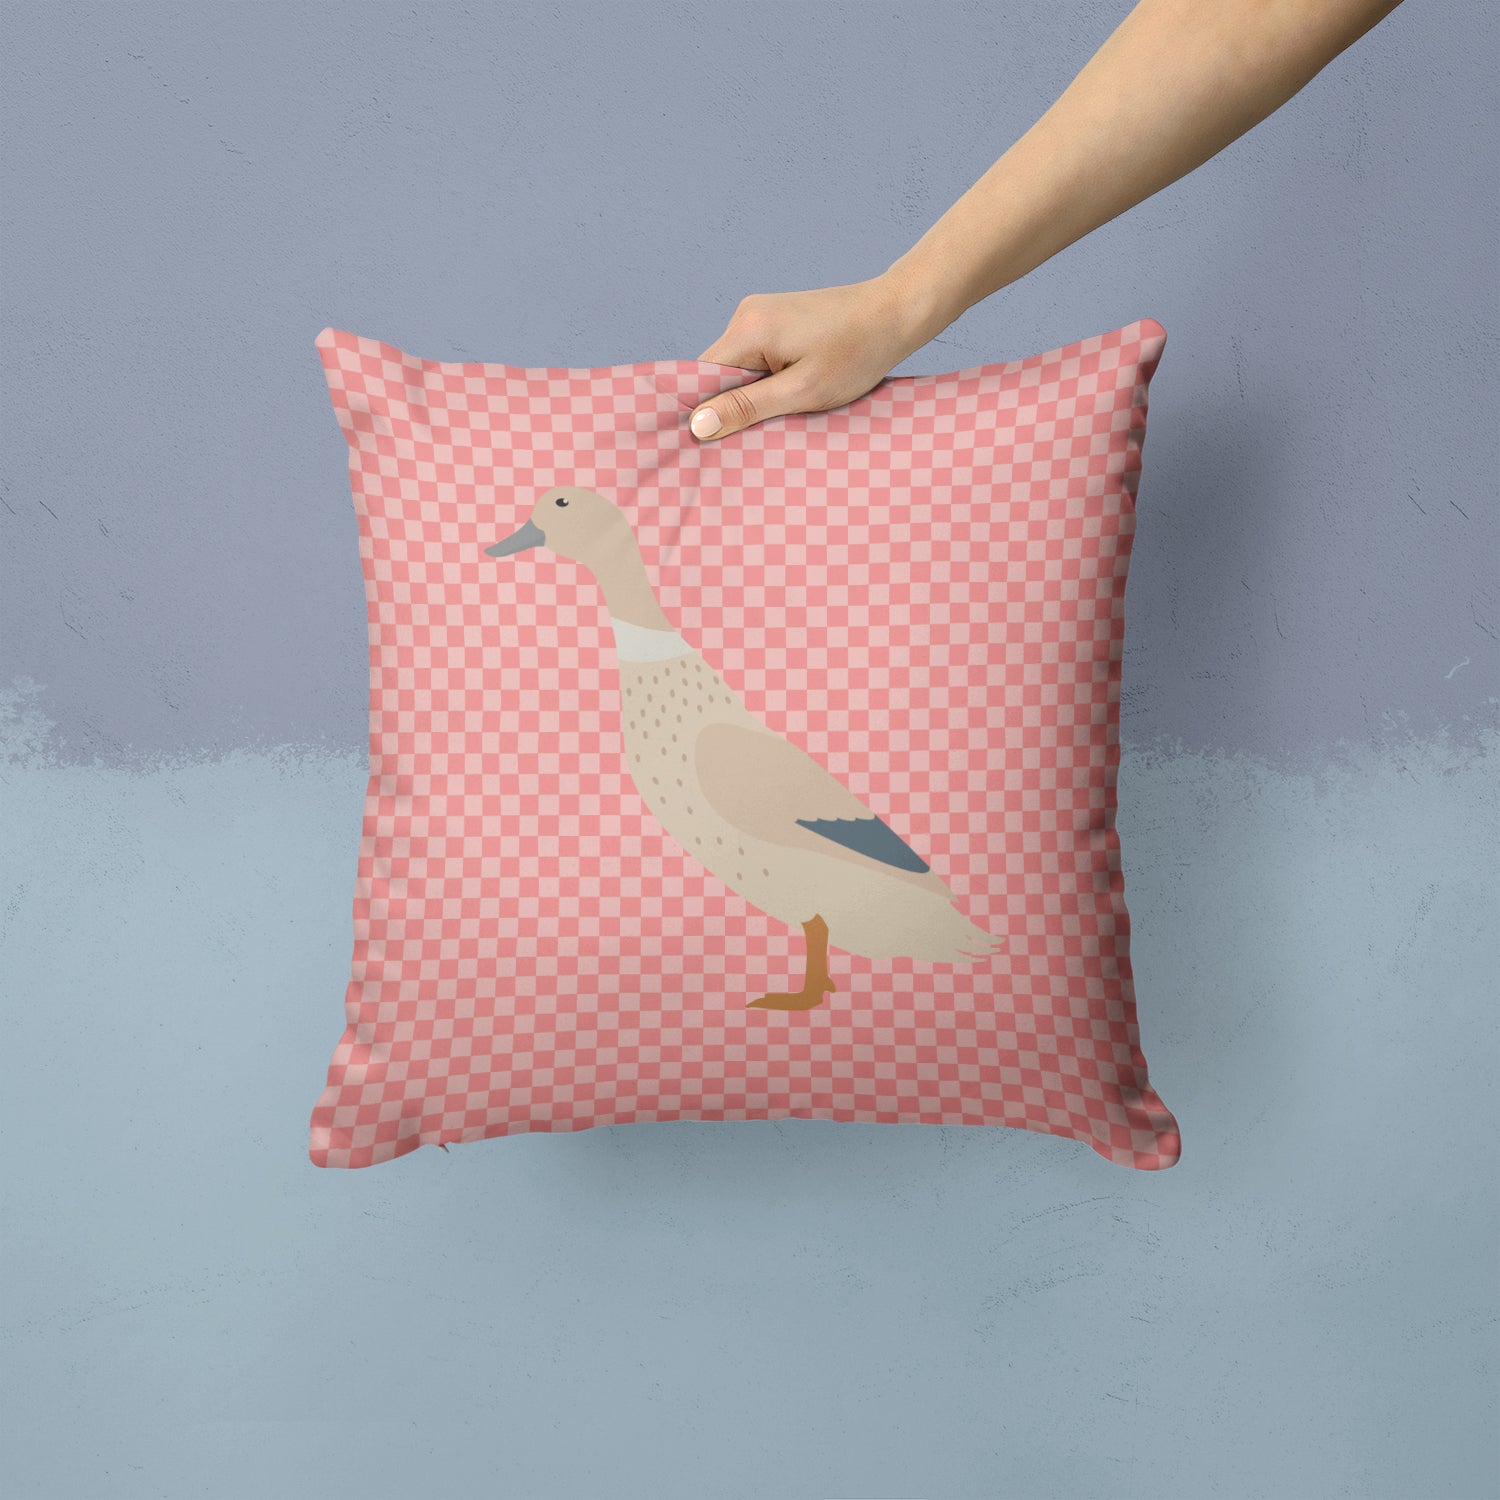 West Harlequin Duck Pink Check Fabric Decorative Pillow BB7858PW1414 - the-store.com